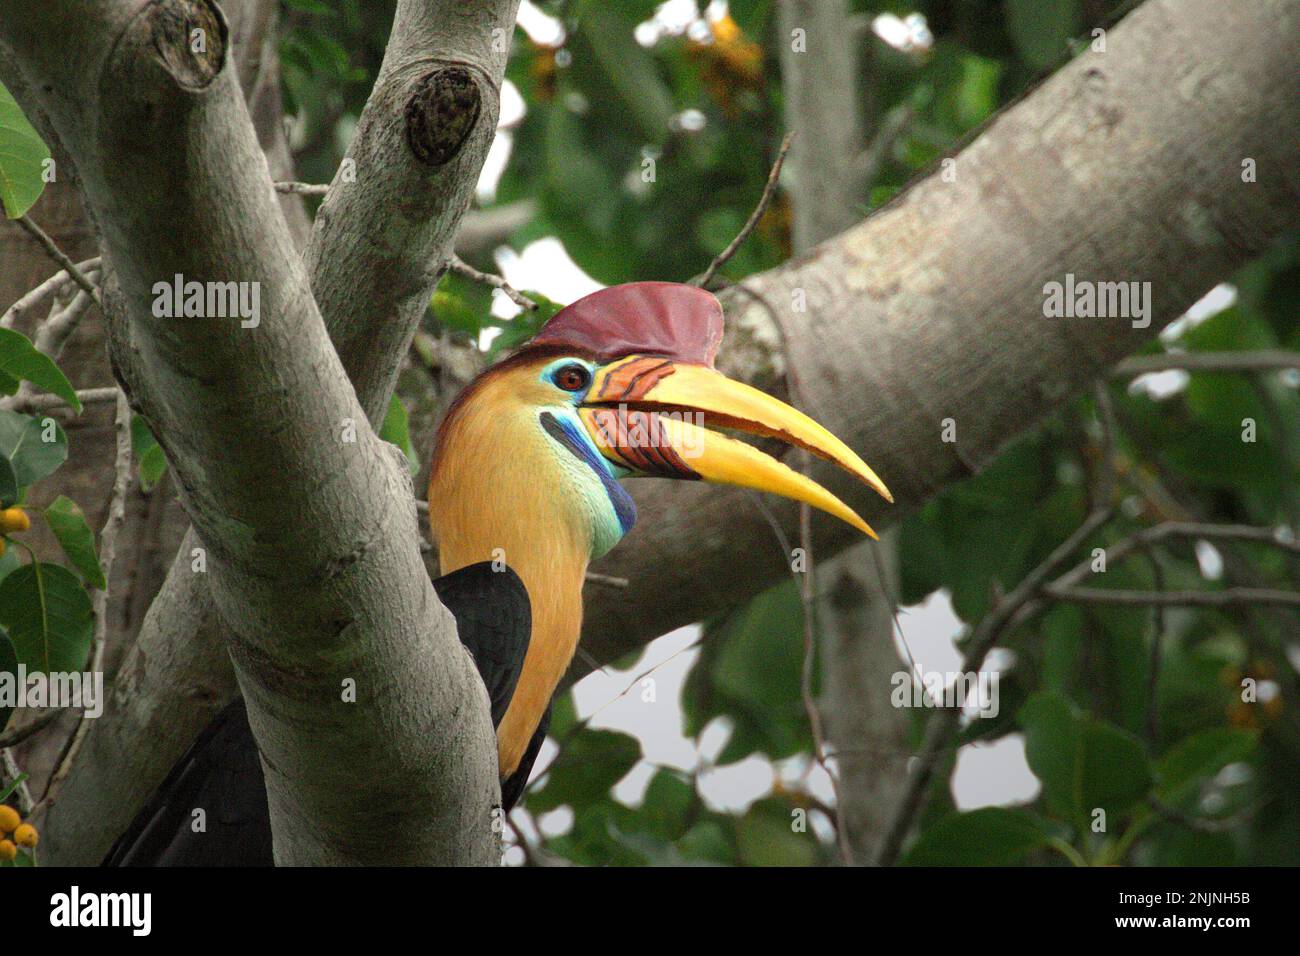 A male individual of knobbed hornbill, or sometimes called Sulawesi wrinkled hornbill (Rhyticeros cassidix), is photographed as he is perching on a branch of a ficus tree in a rainforest area near Mount Tangkoko and Duasudara in Bitung, North Sulawesi, Indonesia. 'A key feature of the rainforests is the high level of species diversity in trees, a characteristic that is vital for the proper functioning of the ecosystem. Species diversity allows the forests to be resilient,' according to a team of researchers of the University of Haifa in a February 2023 publication on Phys.Org. Stock Photo